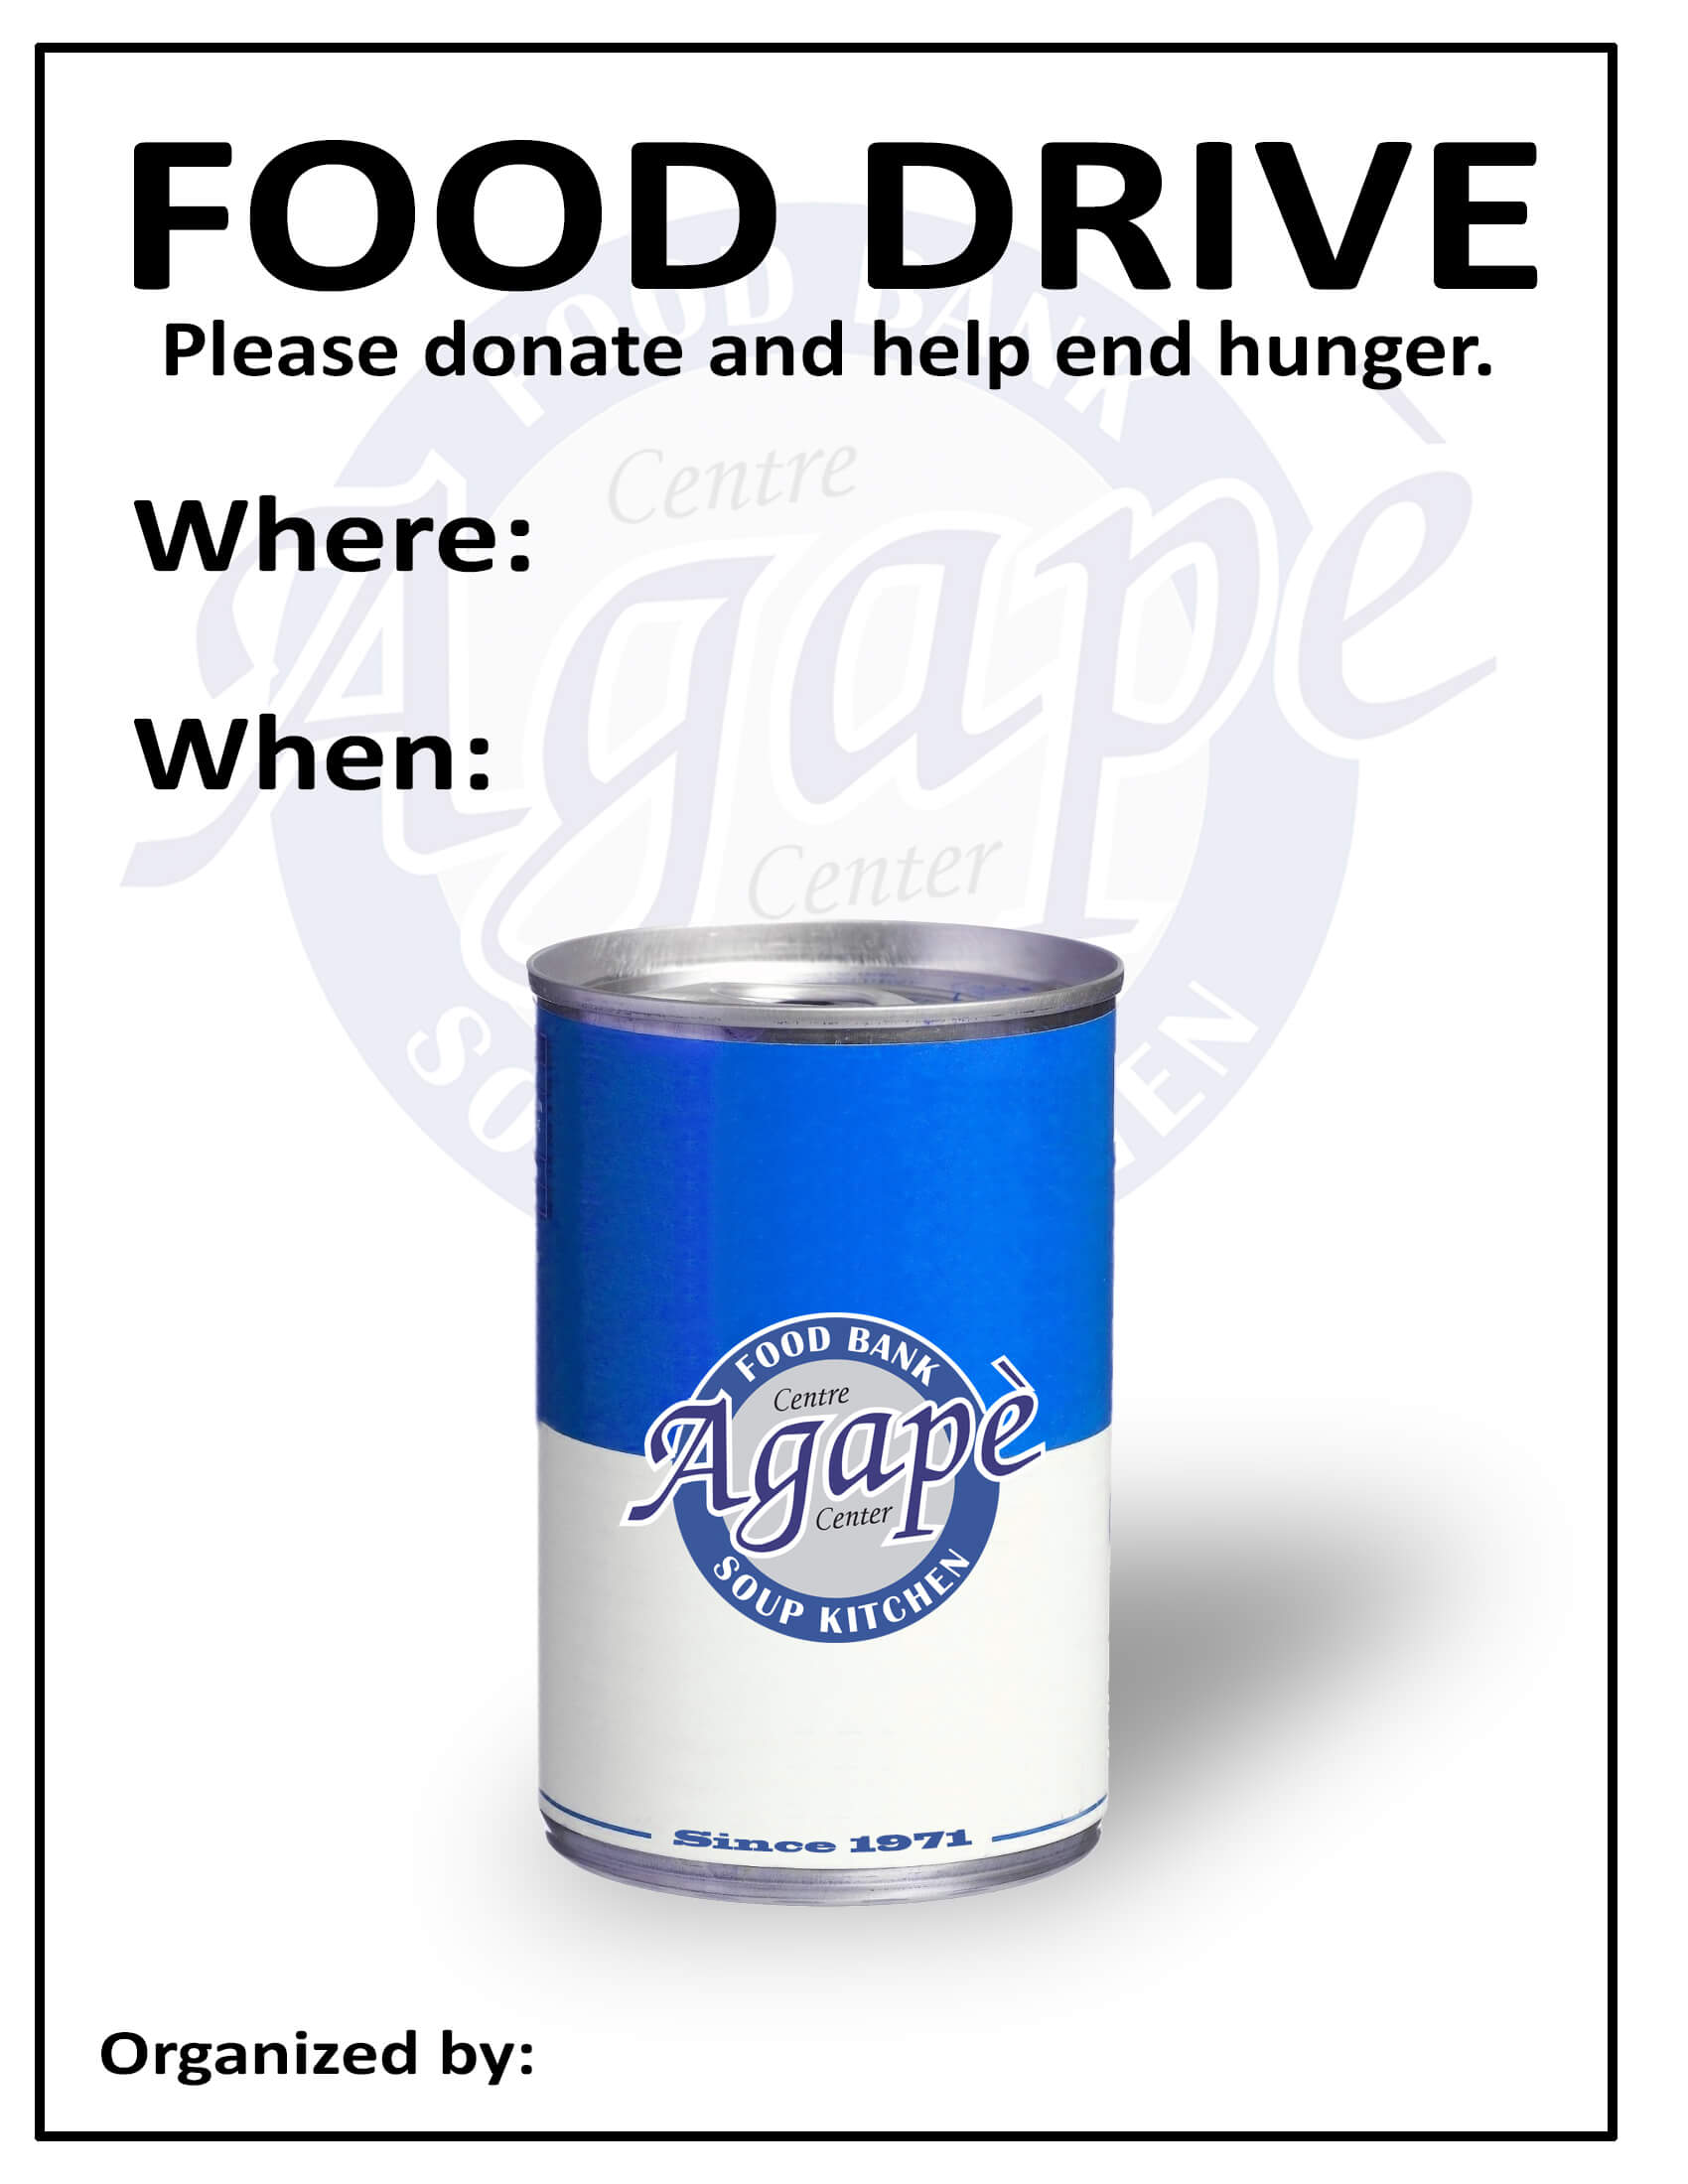 Food Drive Poster Google Search More. Canned Good Drive With Regard To Canned Food Drive Flyer Template